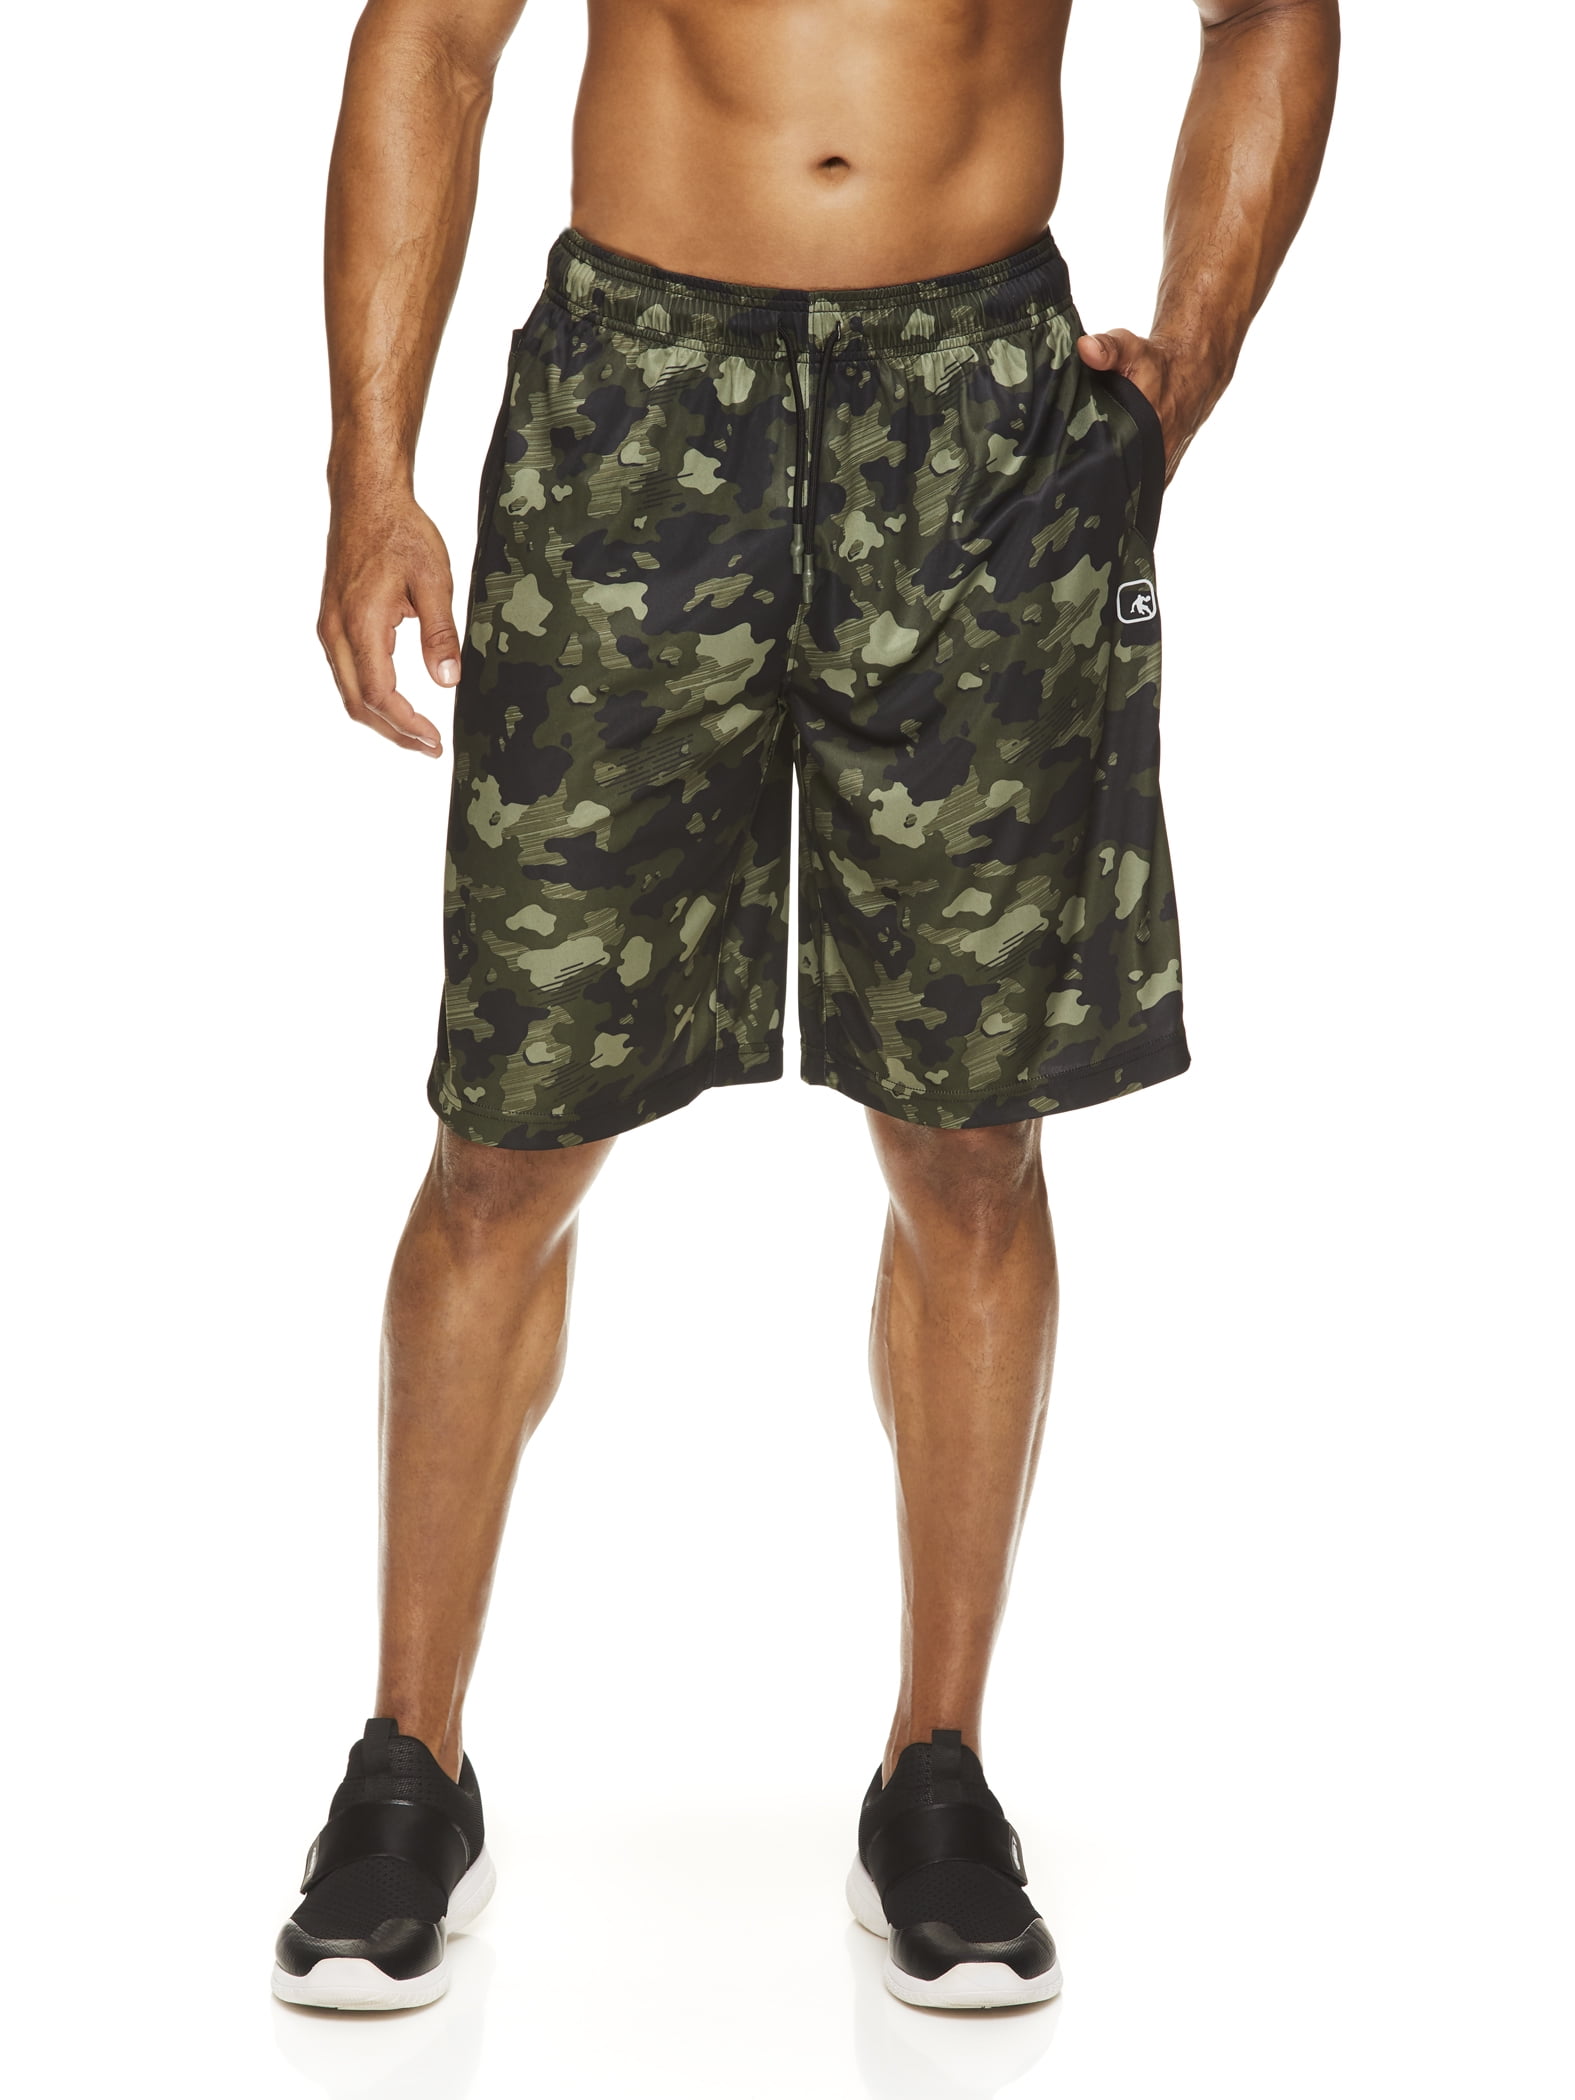 AND1 Men's Active Camo Print Basketball Shorts, up to 5XL